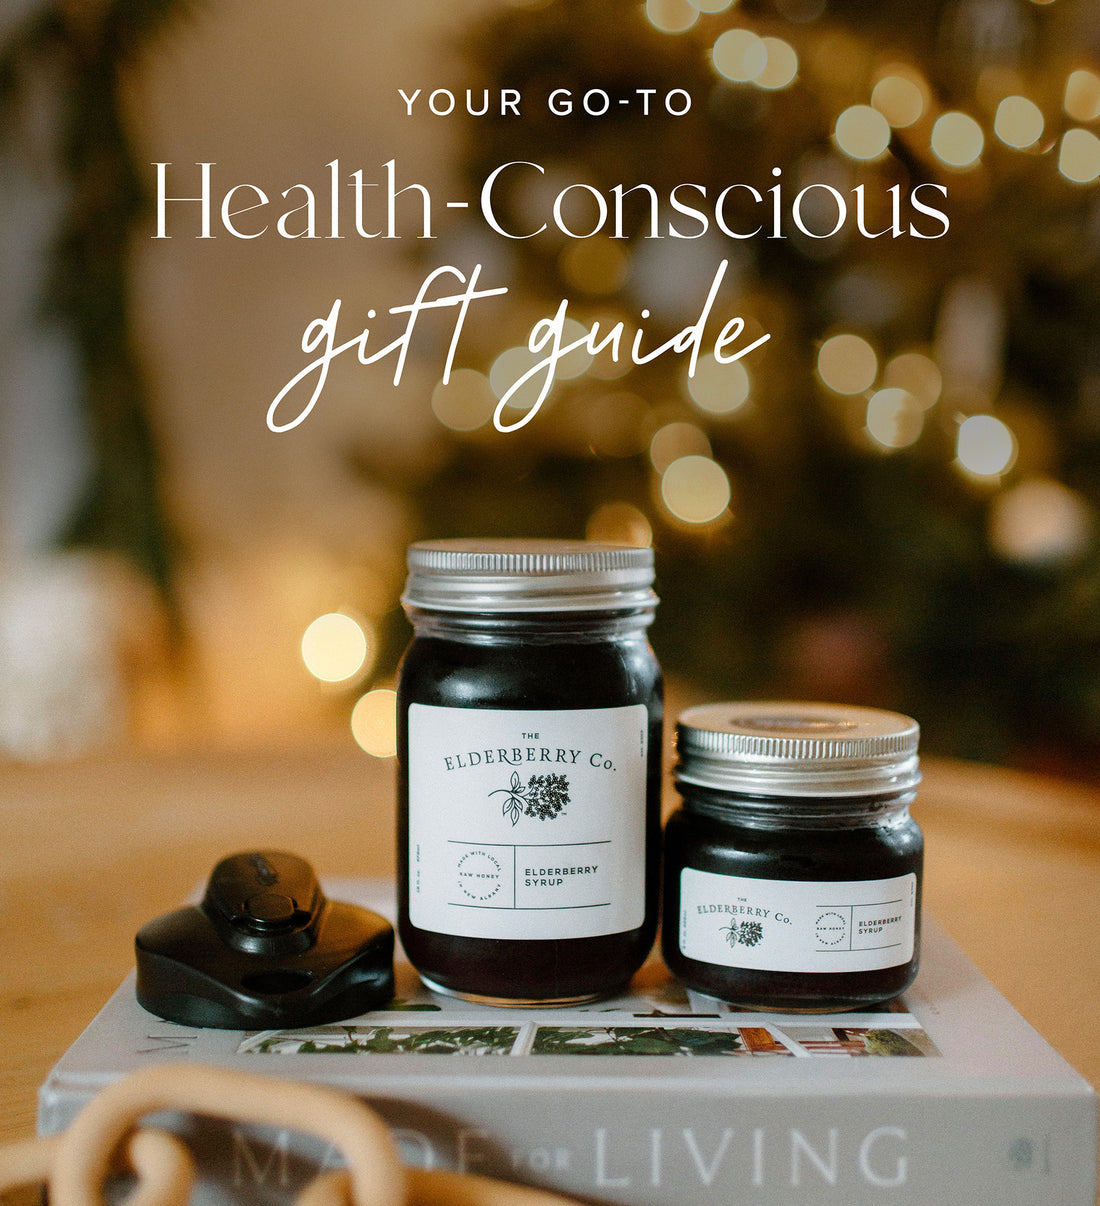 Your Go-To, Health-Conscious Gift Guide This Christmas Season